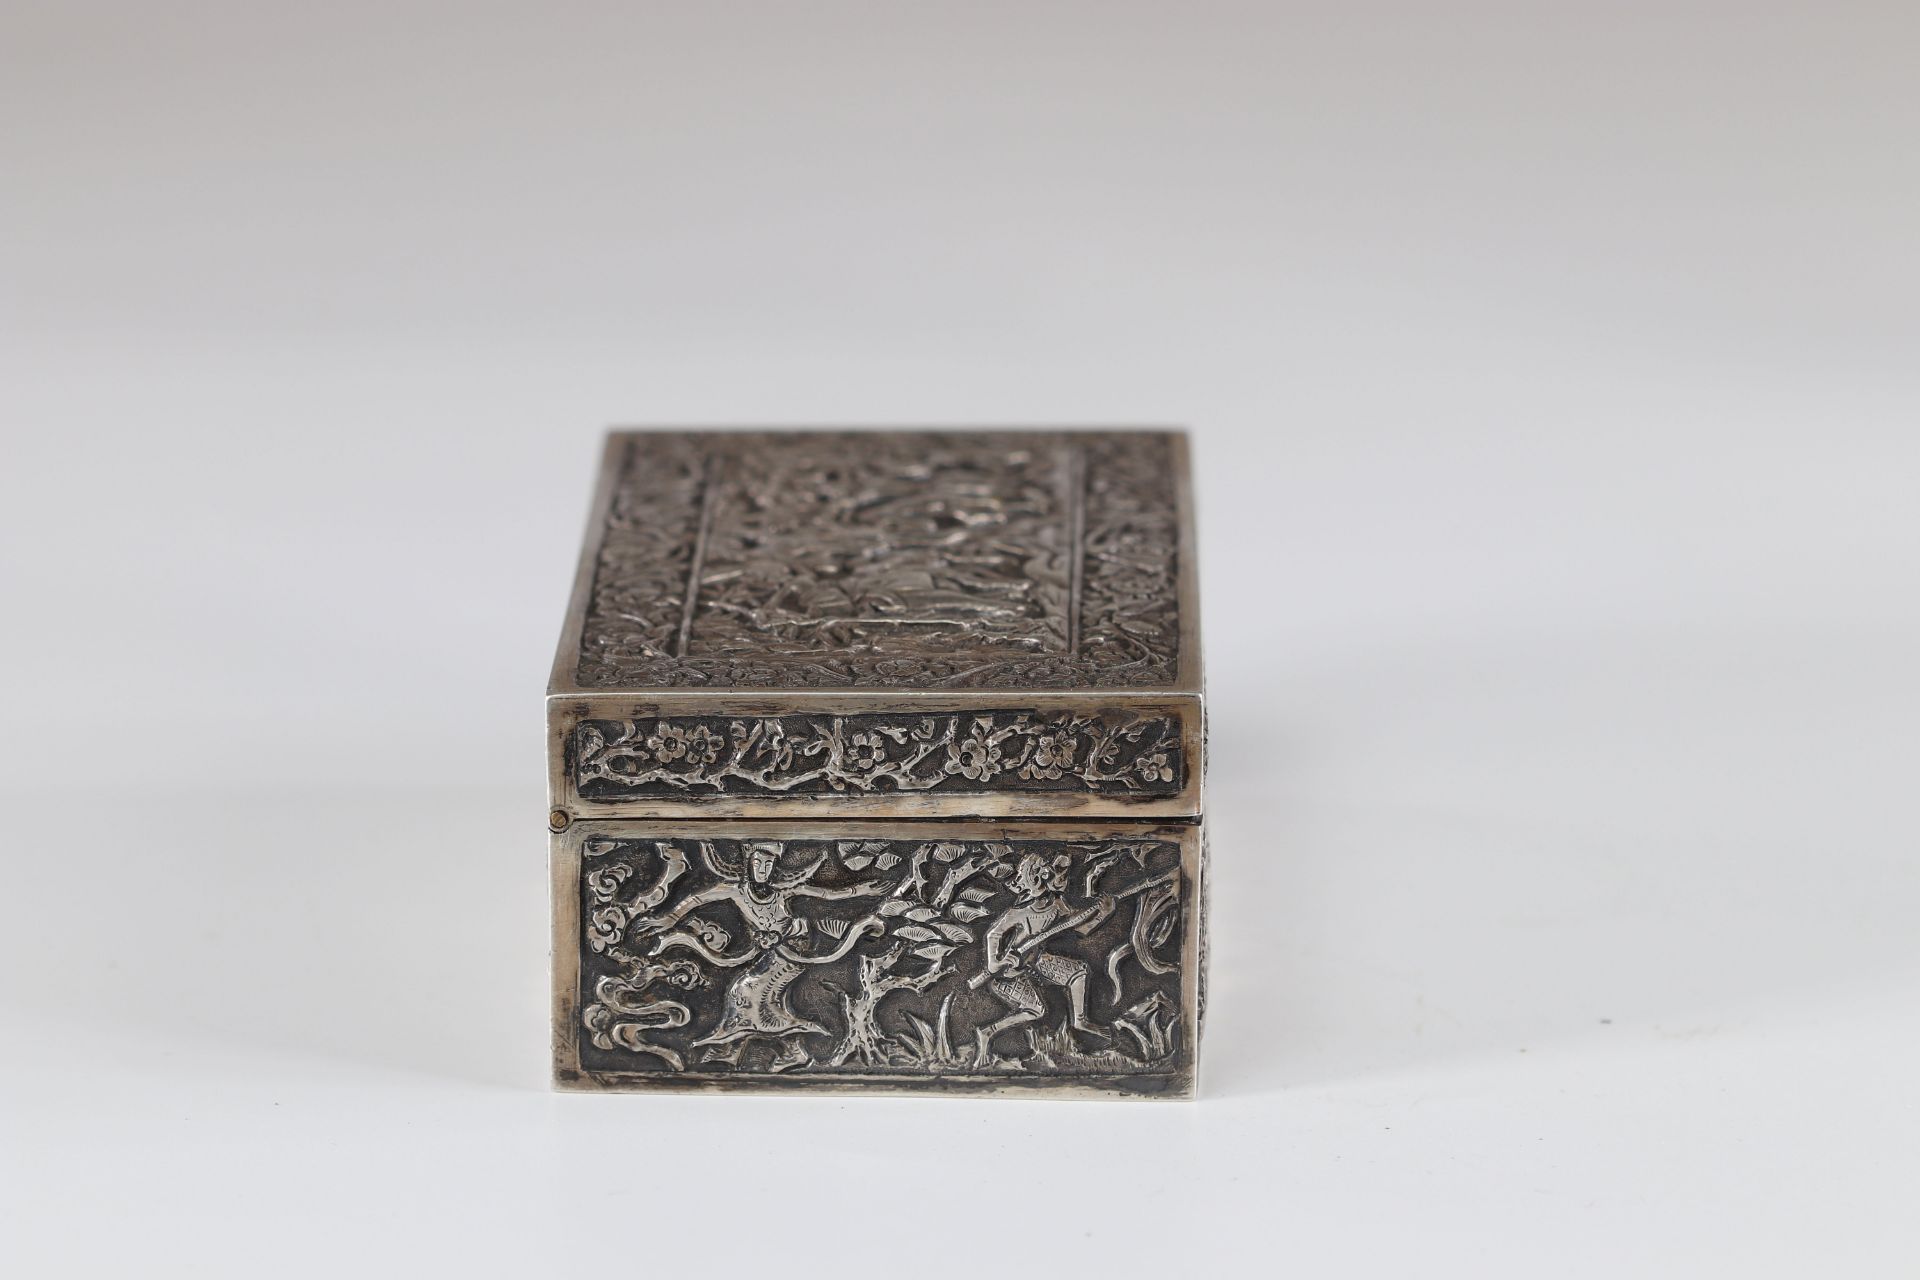 North China Thailand rich silver box decor of scenes of life early 20th century - Image 3 of 5